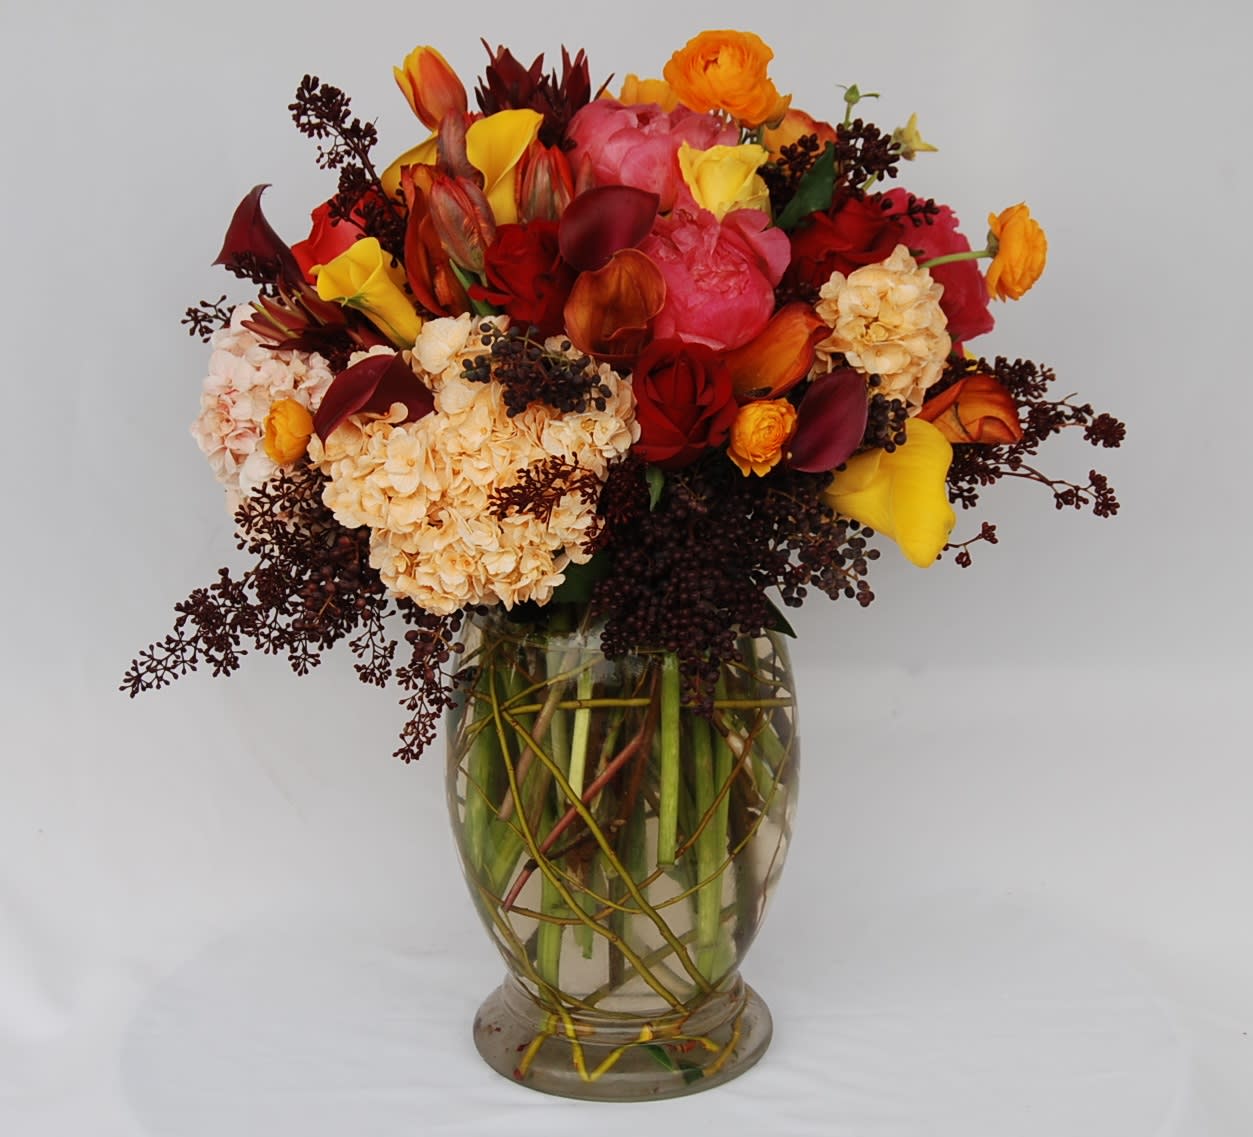 Dressed For Autumn  - A vase filled with hydrangeas, coral peonies, gold, orange, burgundy calla lilies, orange tulips, red roses, and orange Ranunculus, accented with seeded eucalyptus and curly willow.